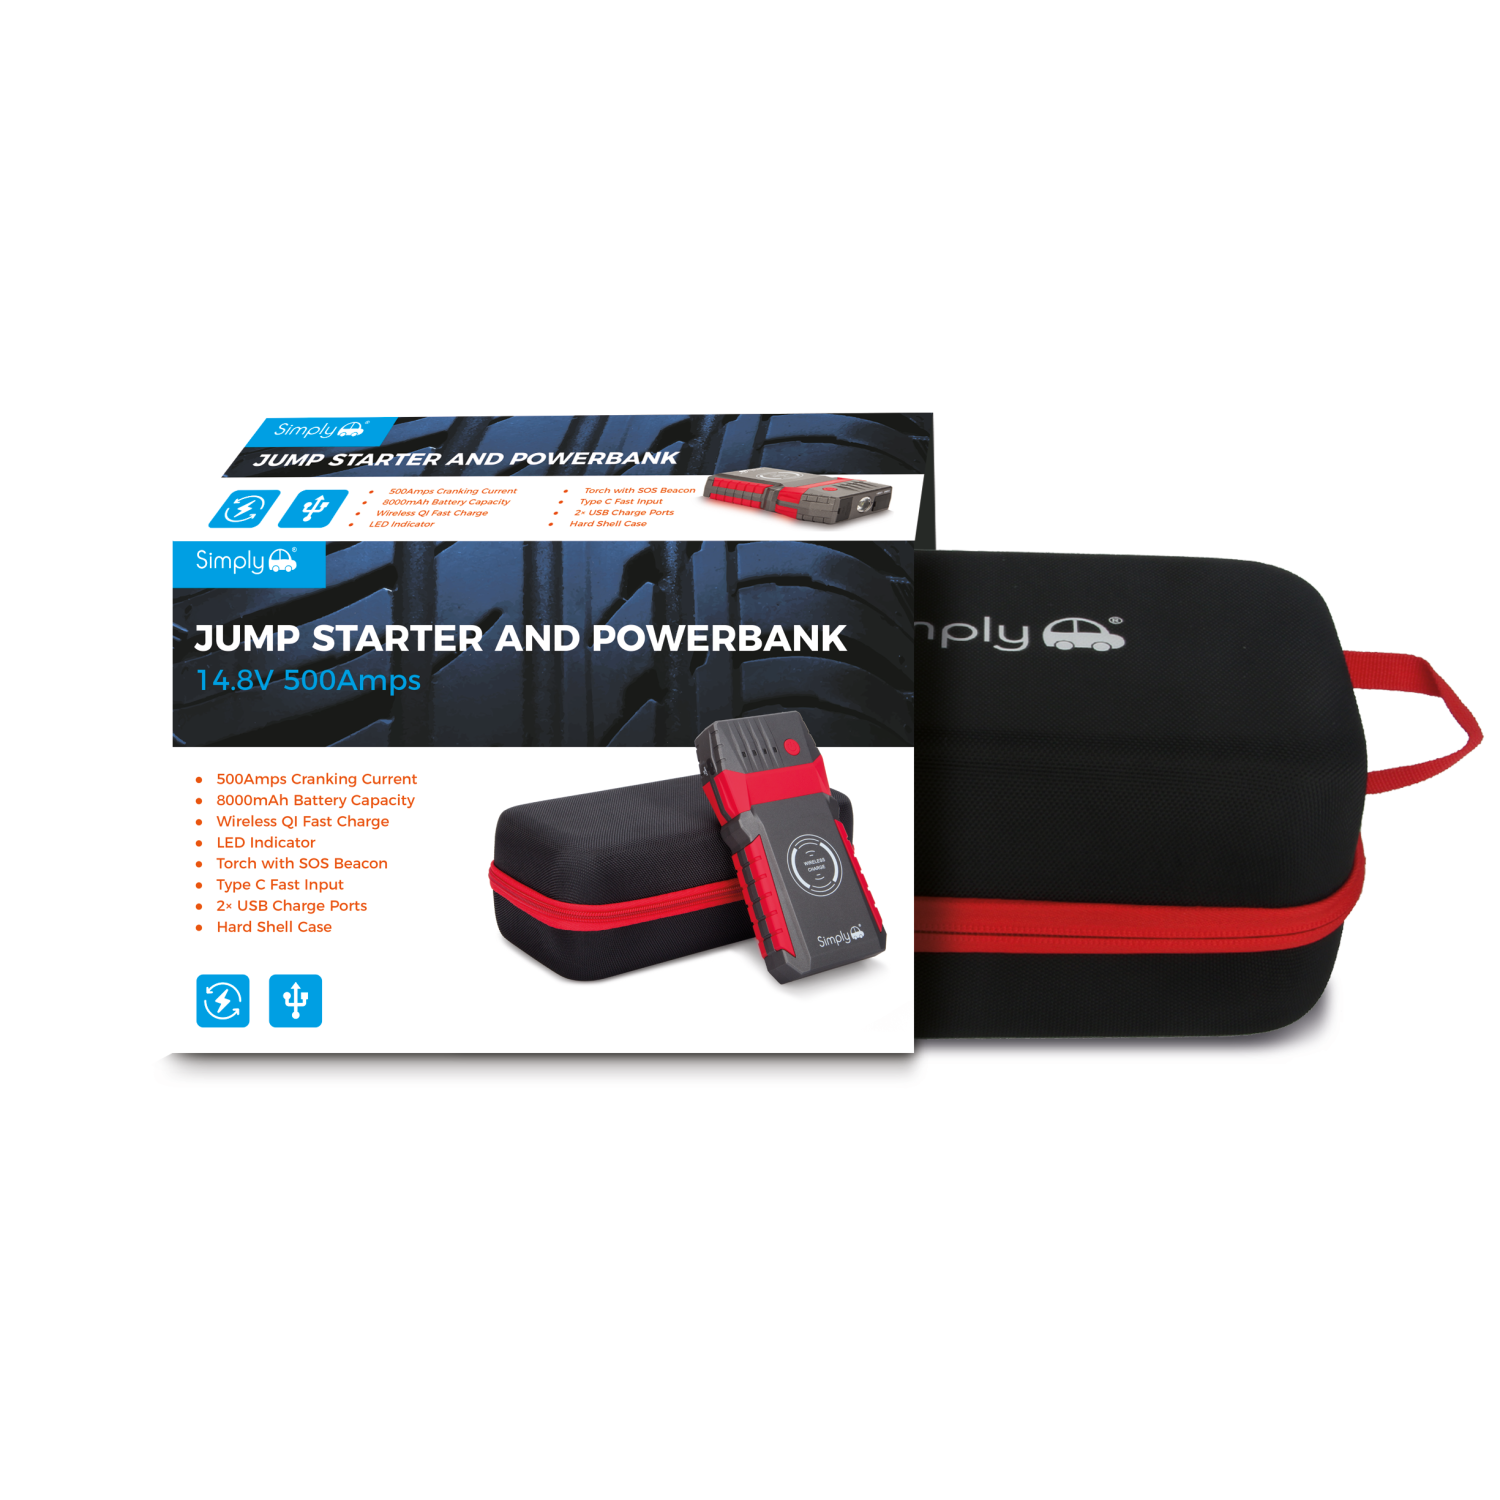 Simply Auto 500AMP PORTABLE JUMP STARTER AND POWERBANK - JS002